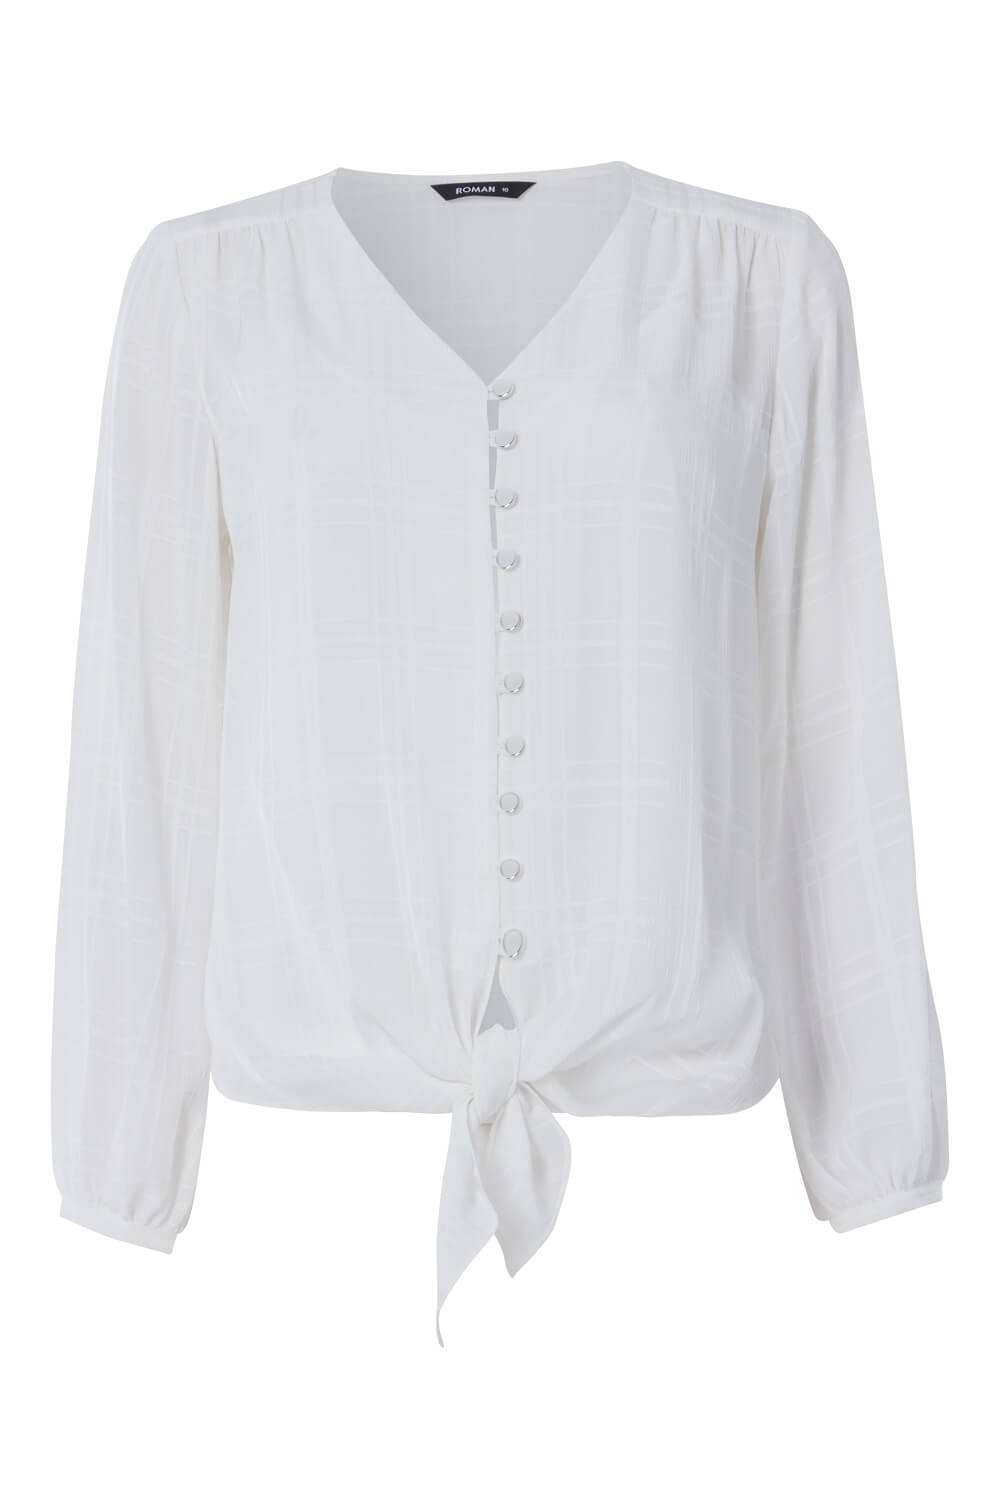 Ivory  Check Tie Front Blouse, Image 5 of 5